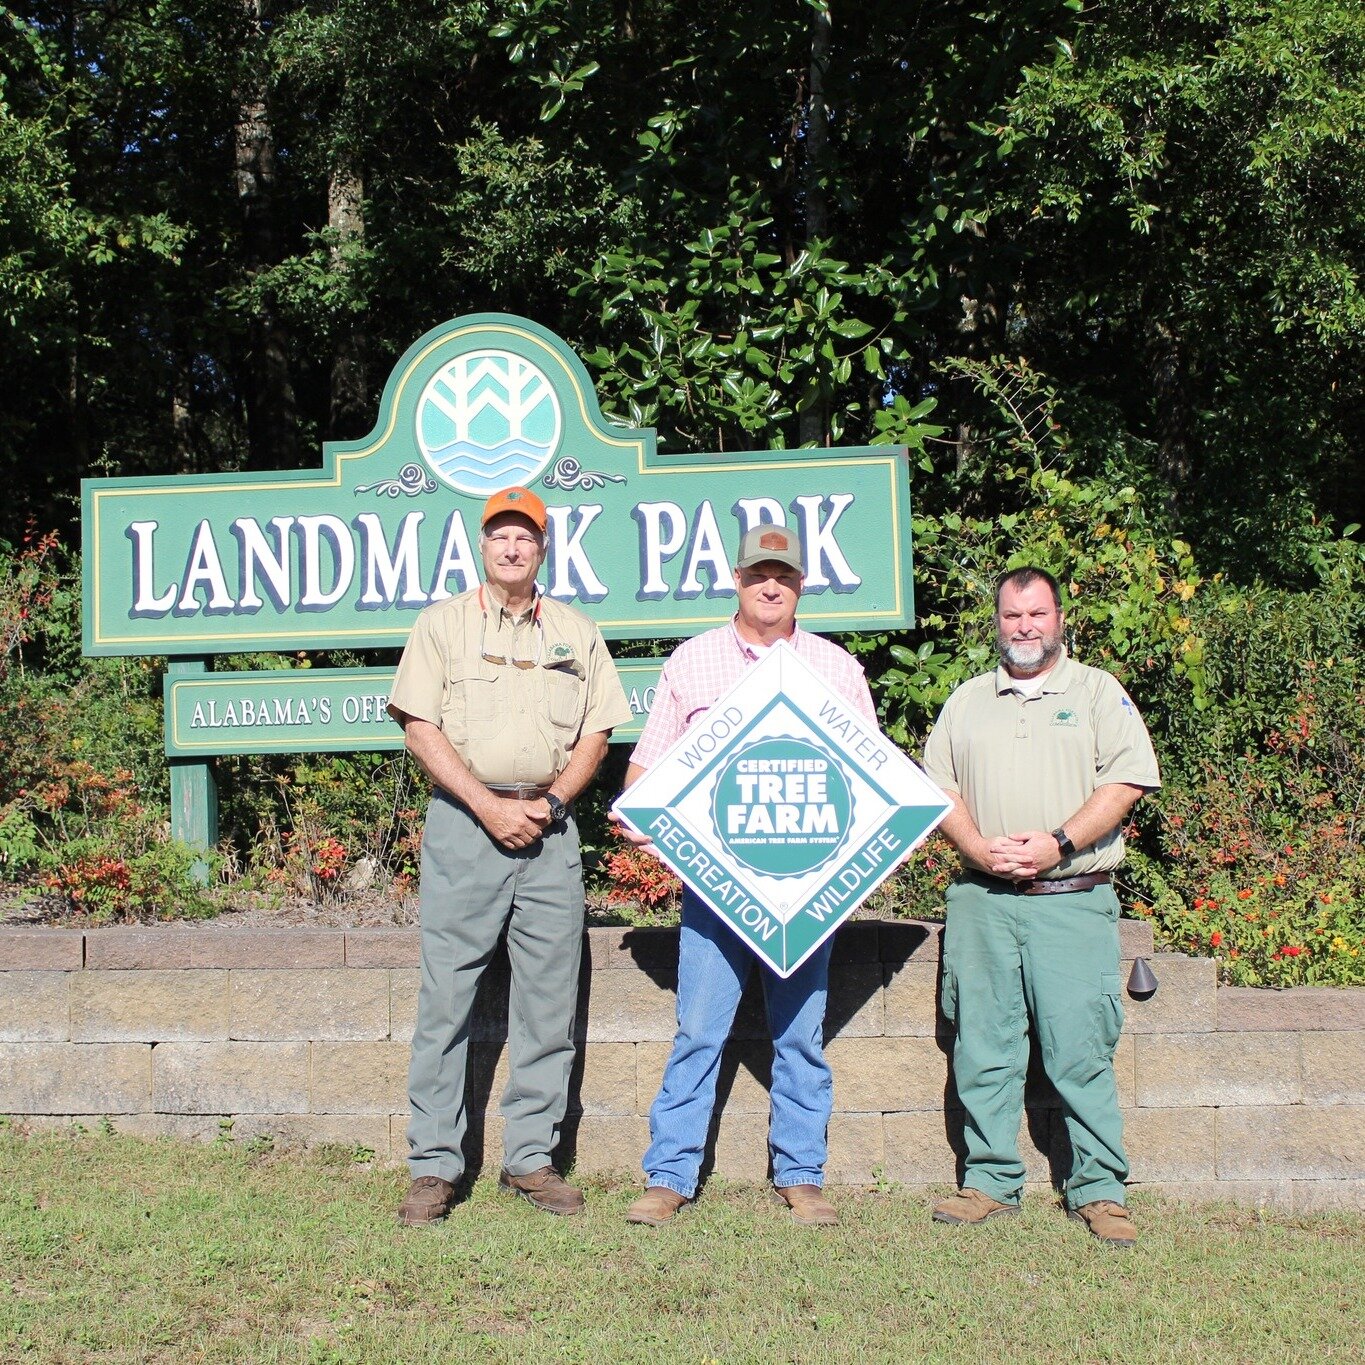 Alabama Forestry Commission's Ed Lewis and Thomas Moss recently certified Landmark Park in Dothan, as a Tree Farm. 

&ldquo;We congratulate Landmark Park on achieving Tree Farm certification,&rdquo; said State Forester Rick Oates. &ldquo;Our agency h